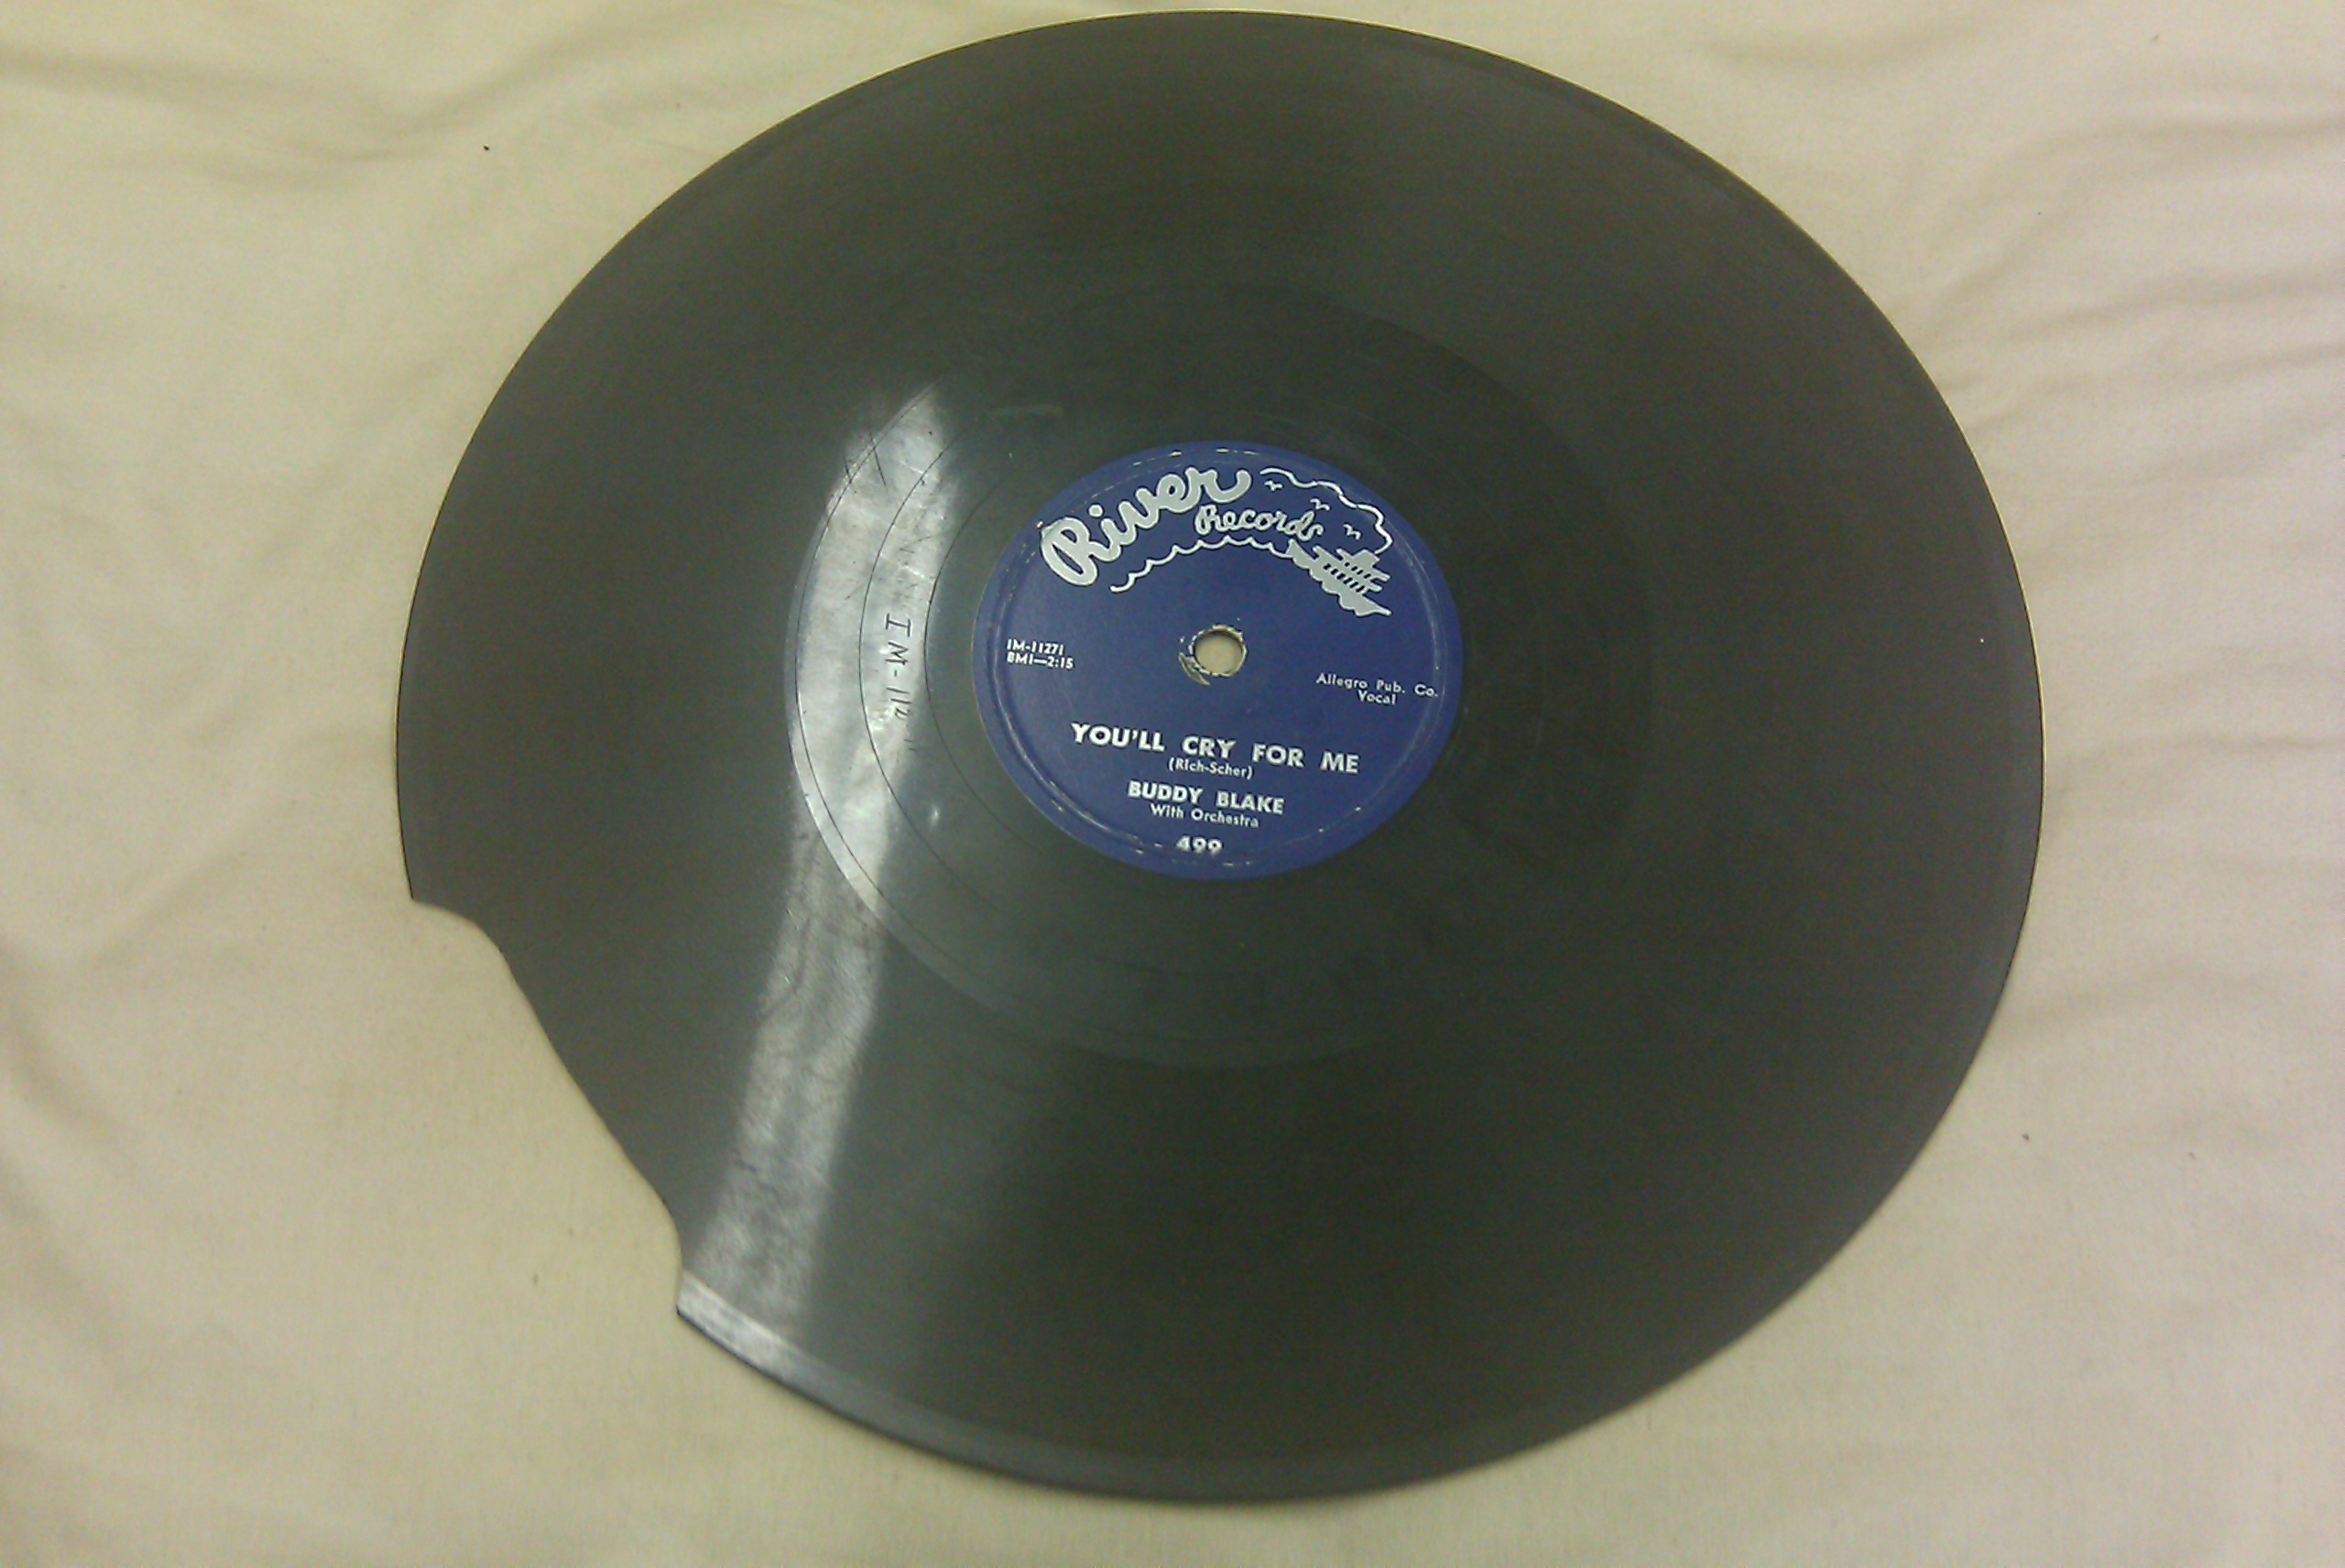 RIVER RECORDS 78 BUDDY BLAKE - ROSIE & BUDDY BLAKE - YOU’LL CRY FOR ME